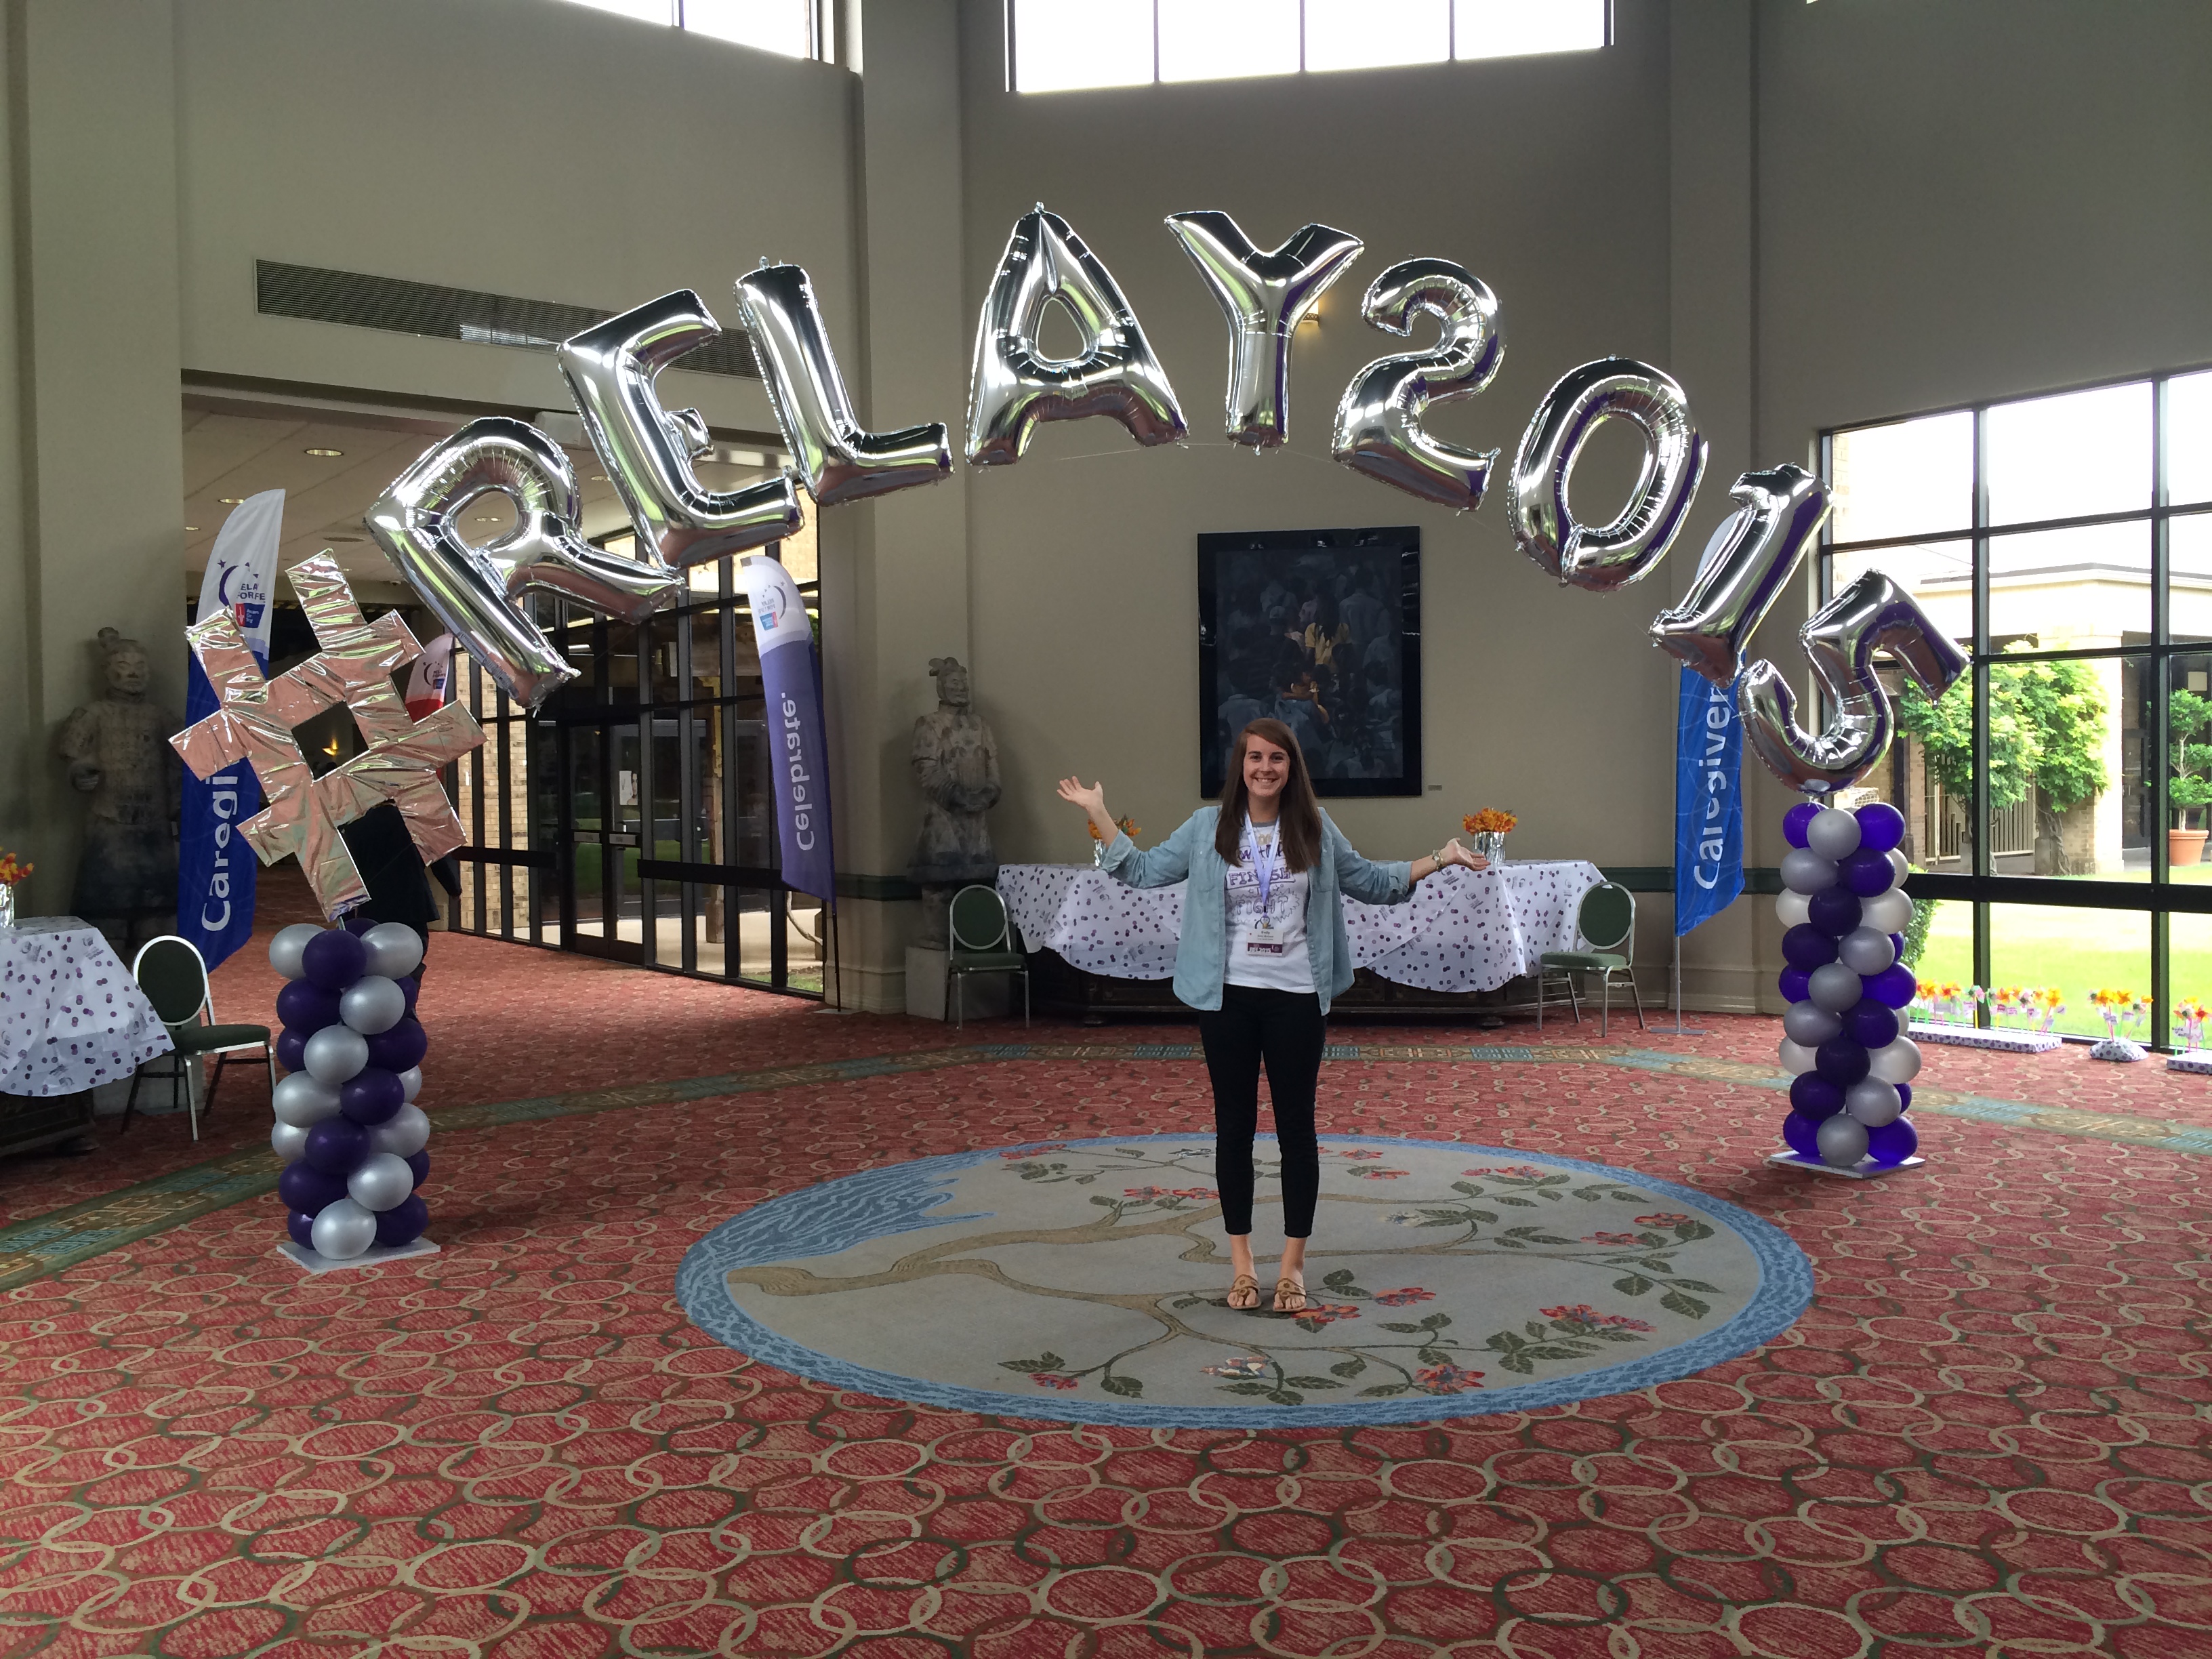 Emily McCloud, director of Relay For Life at Virginia Tech, poses with balloons that spell out #RELAY 2015.